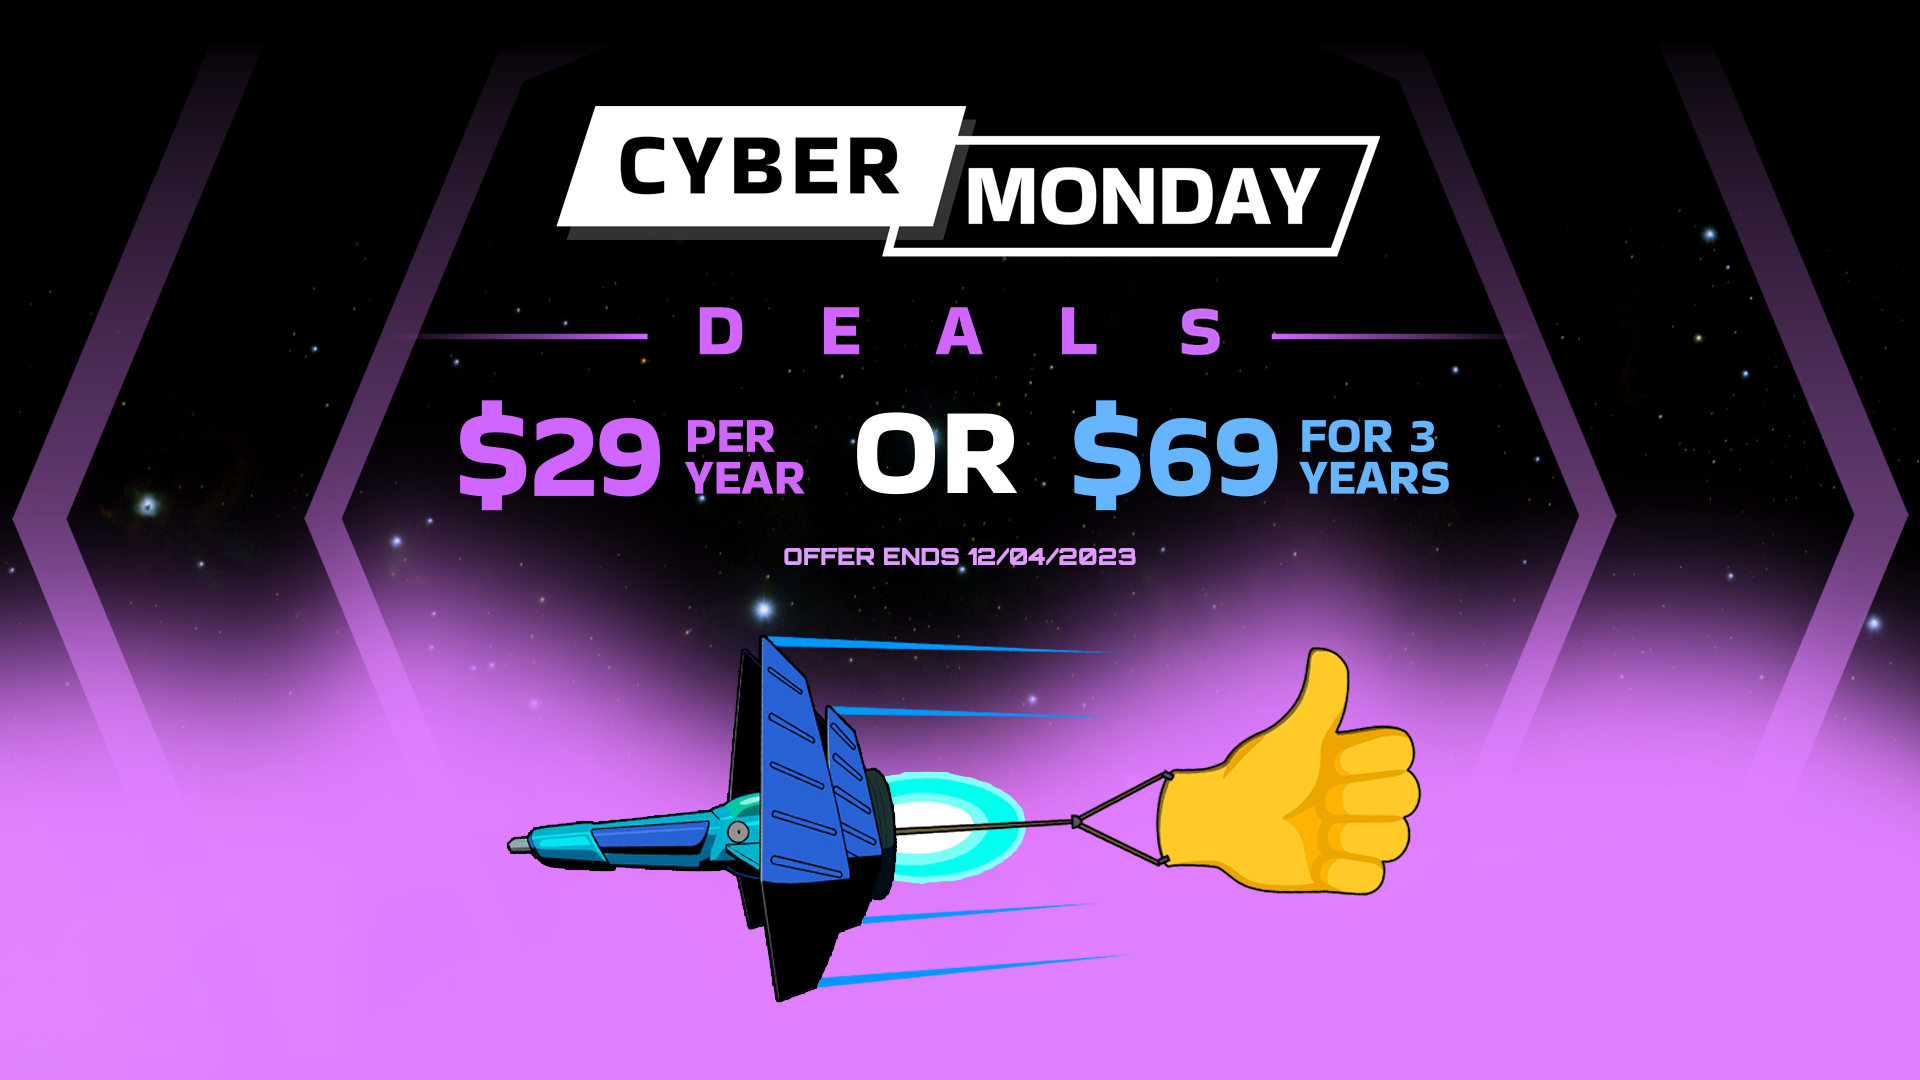 Cyber Monday: The Only Monday That Doesn't Suck Deal!